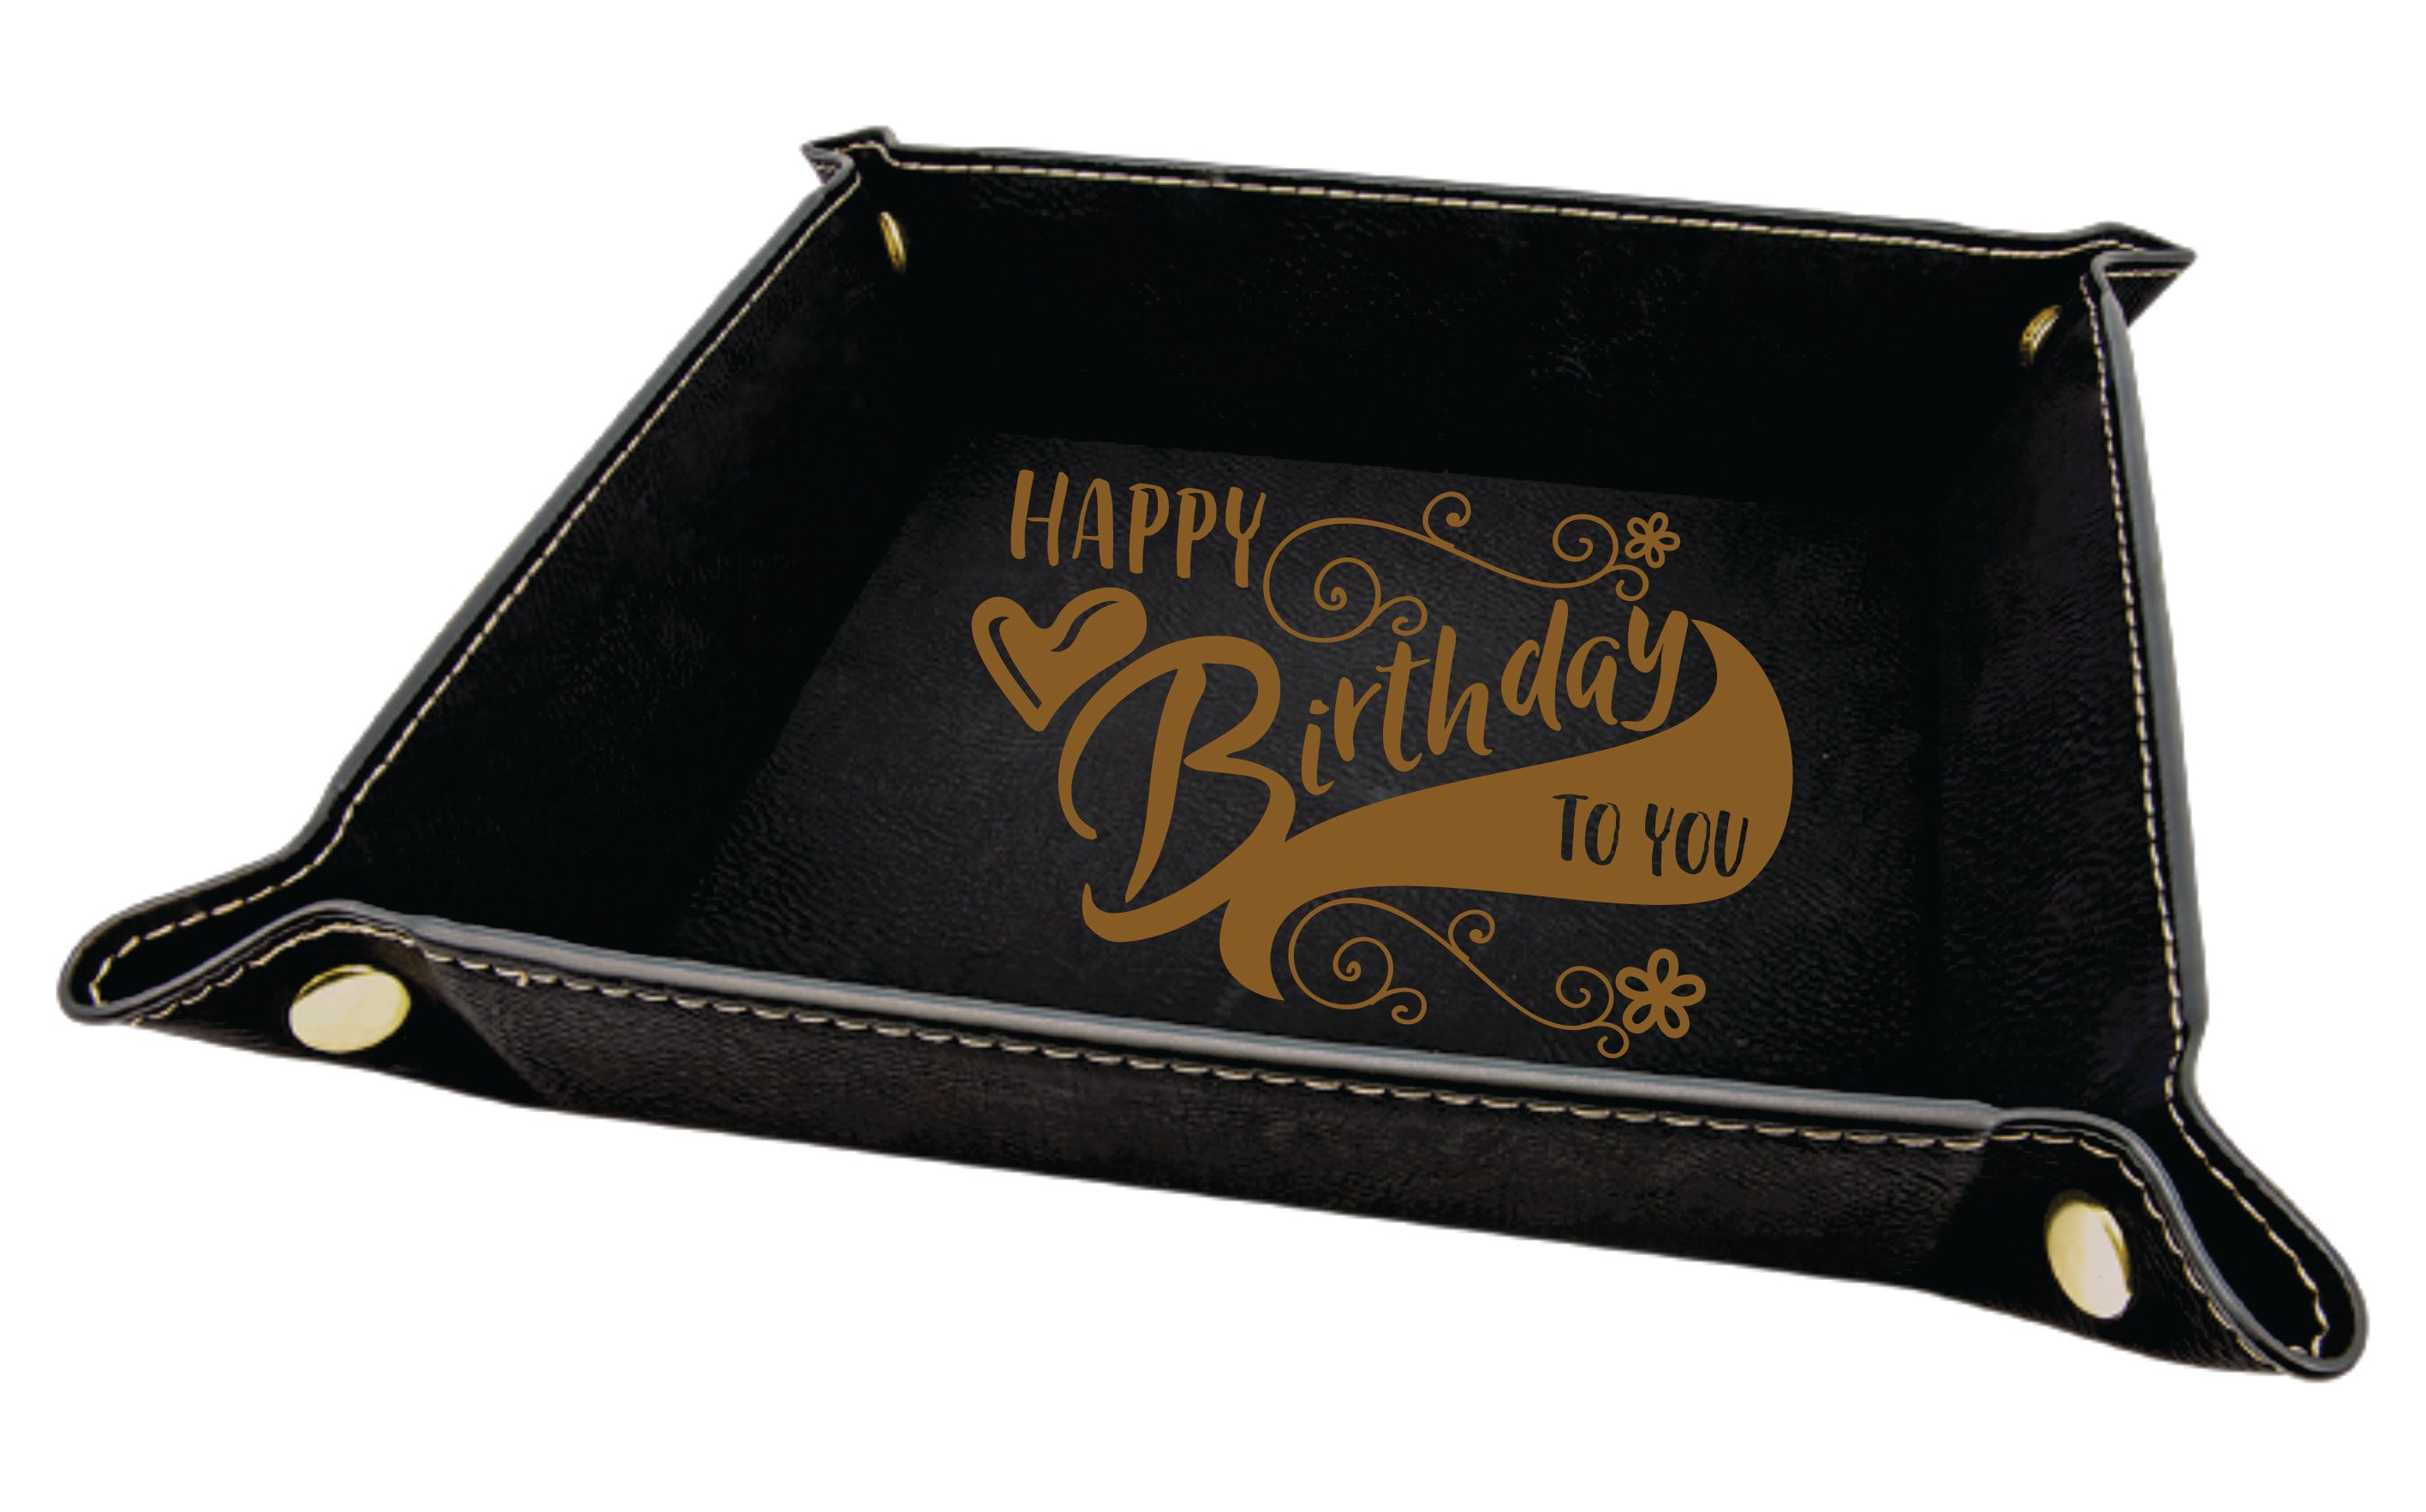 6" x 6" Black/Gold Laserable Leatherette Snap Up Tray with Gold Snaps